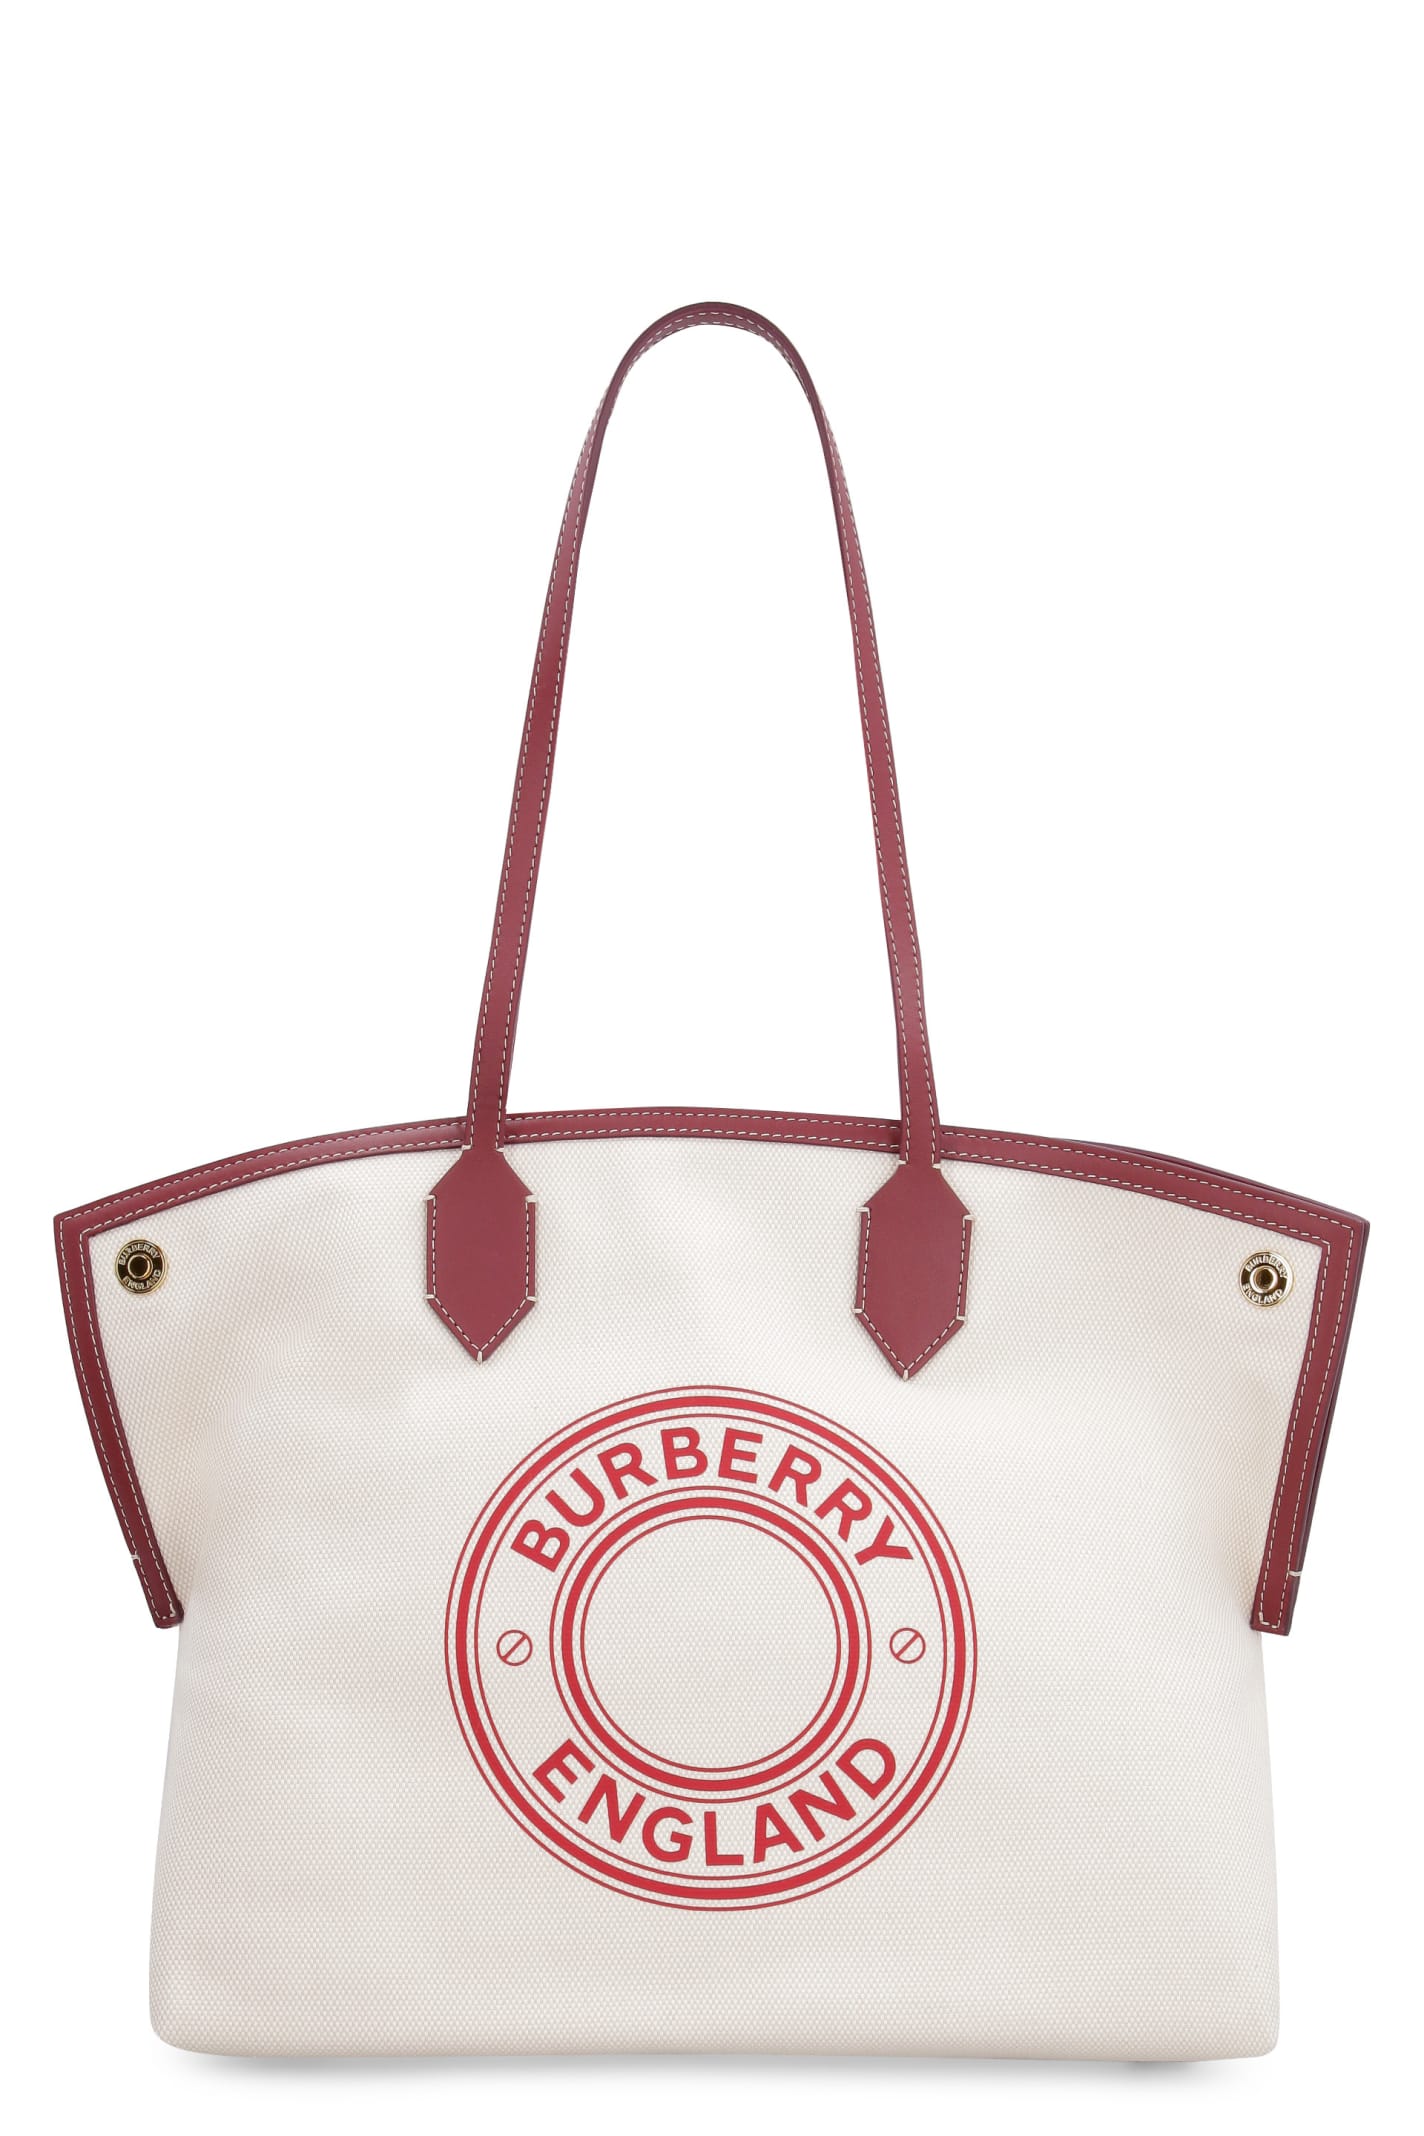 Burberry Society Canvas Tote Bag